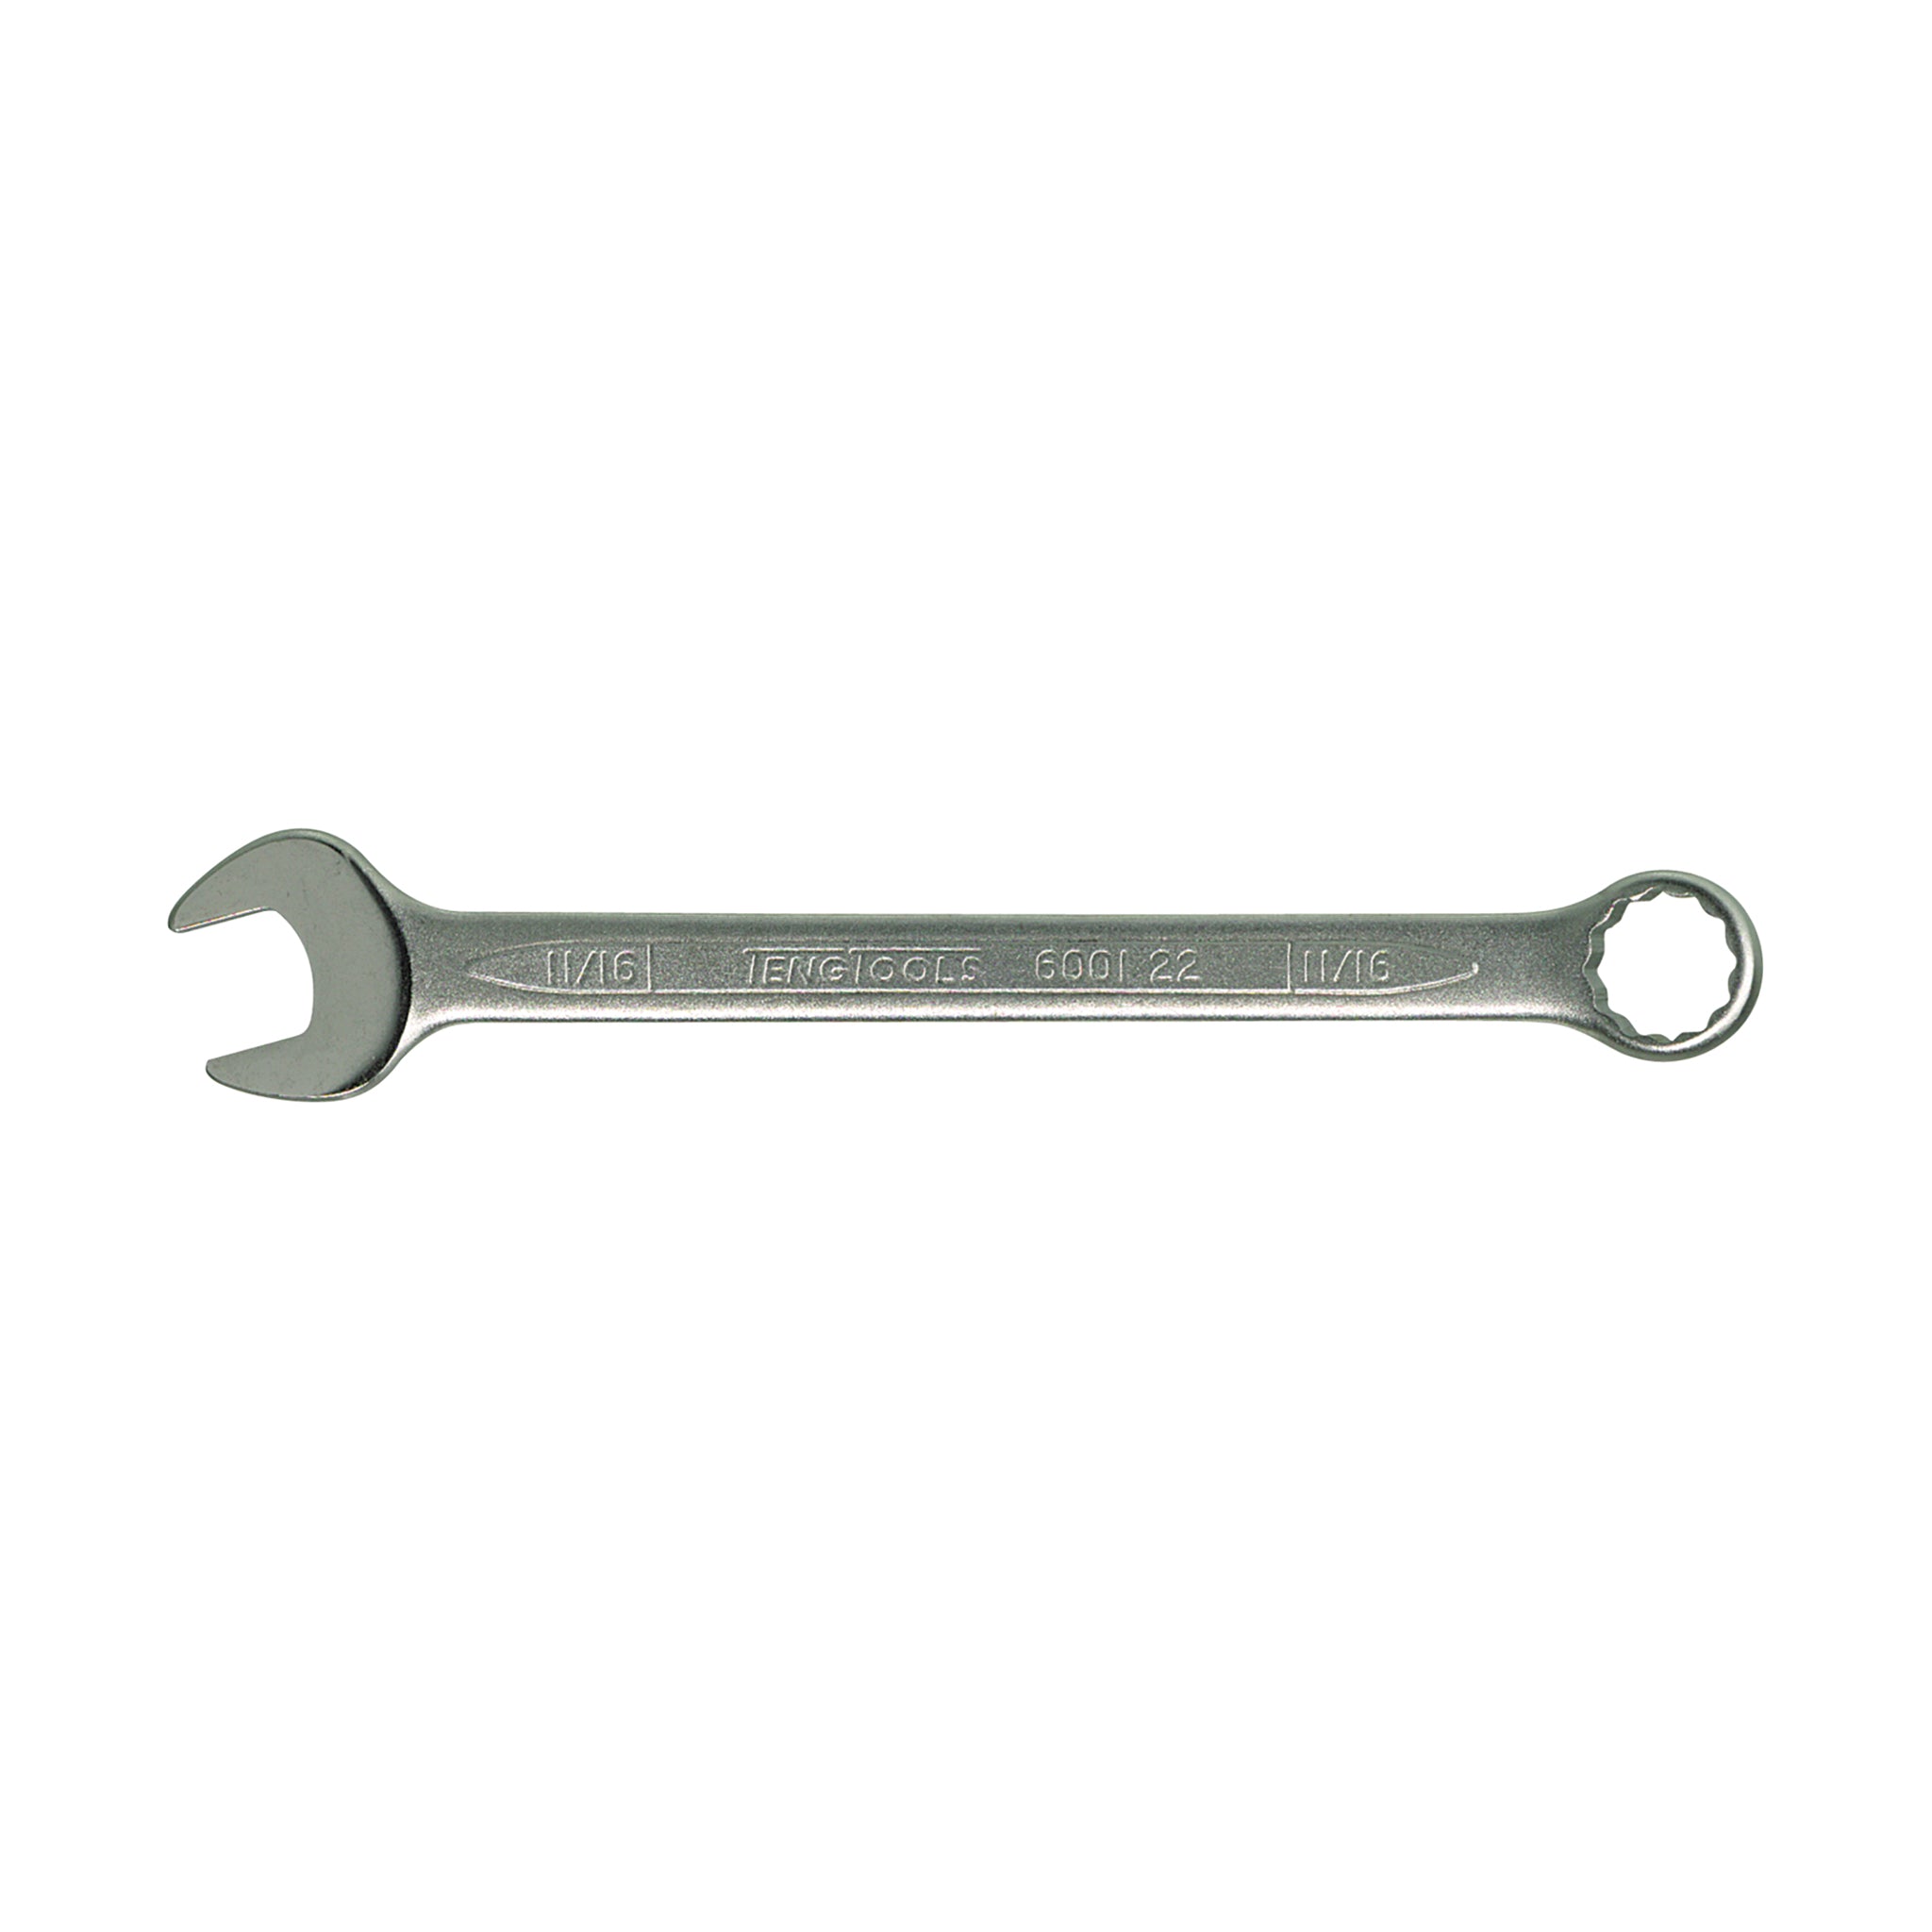 Standard Combination SAE Wrenches Made With Chrome Vanadium Steel - 3/4